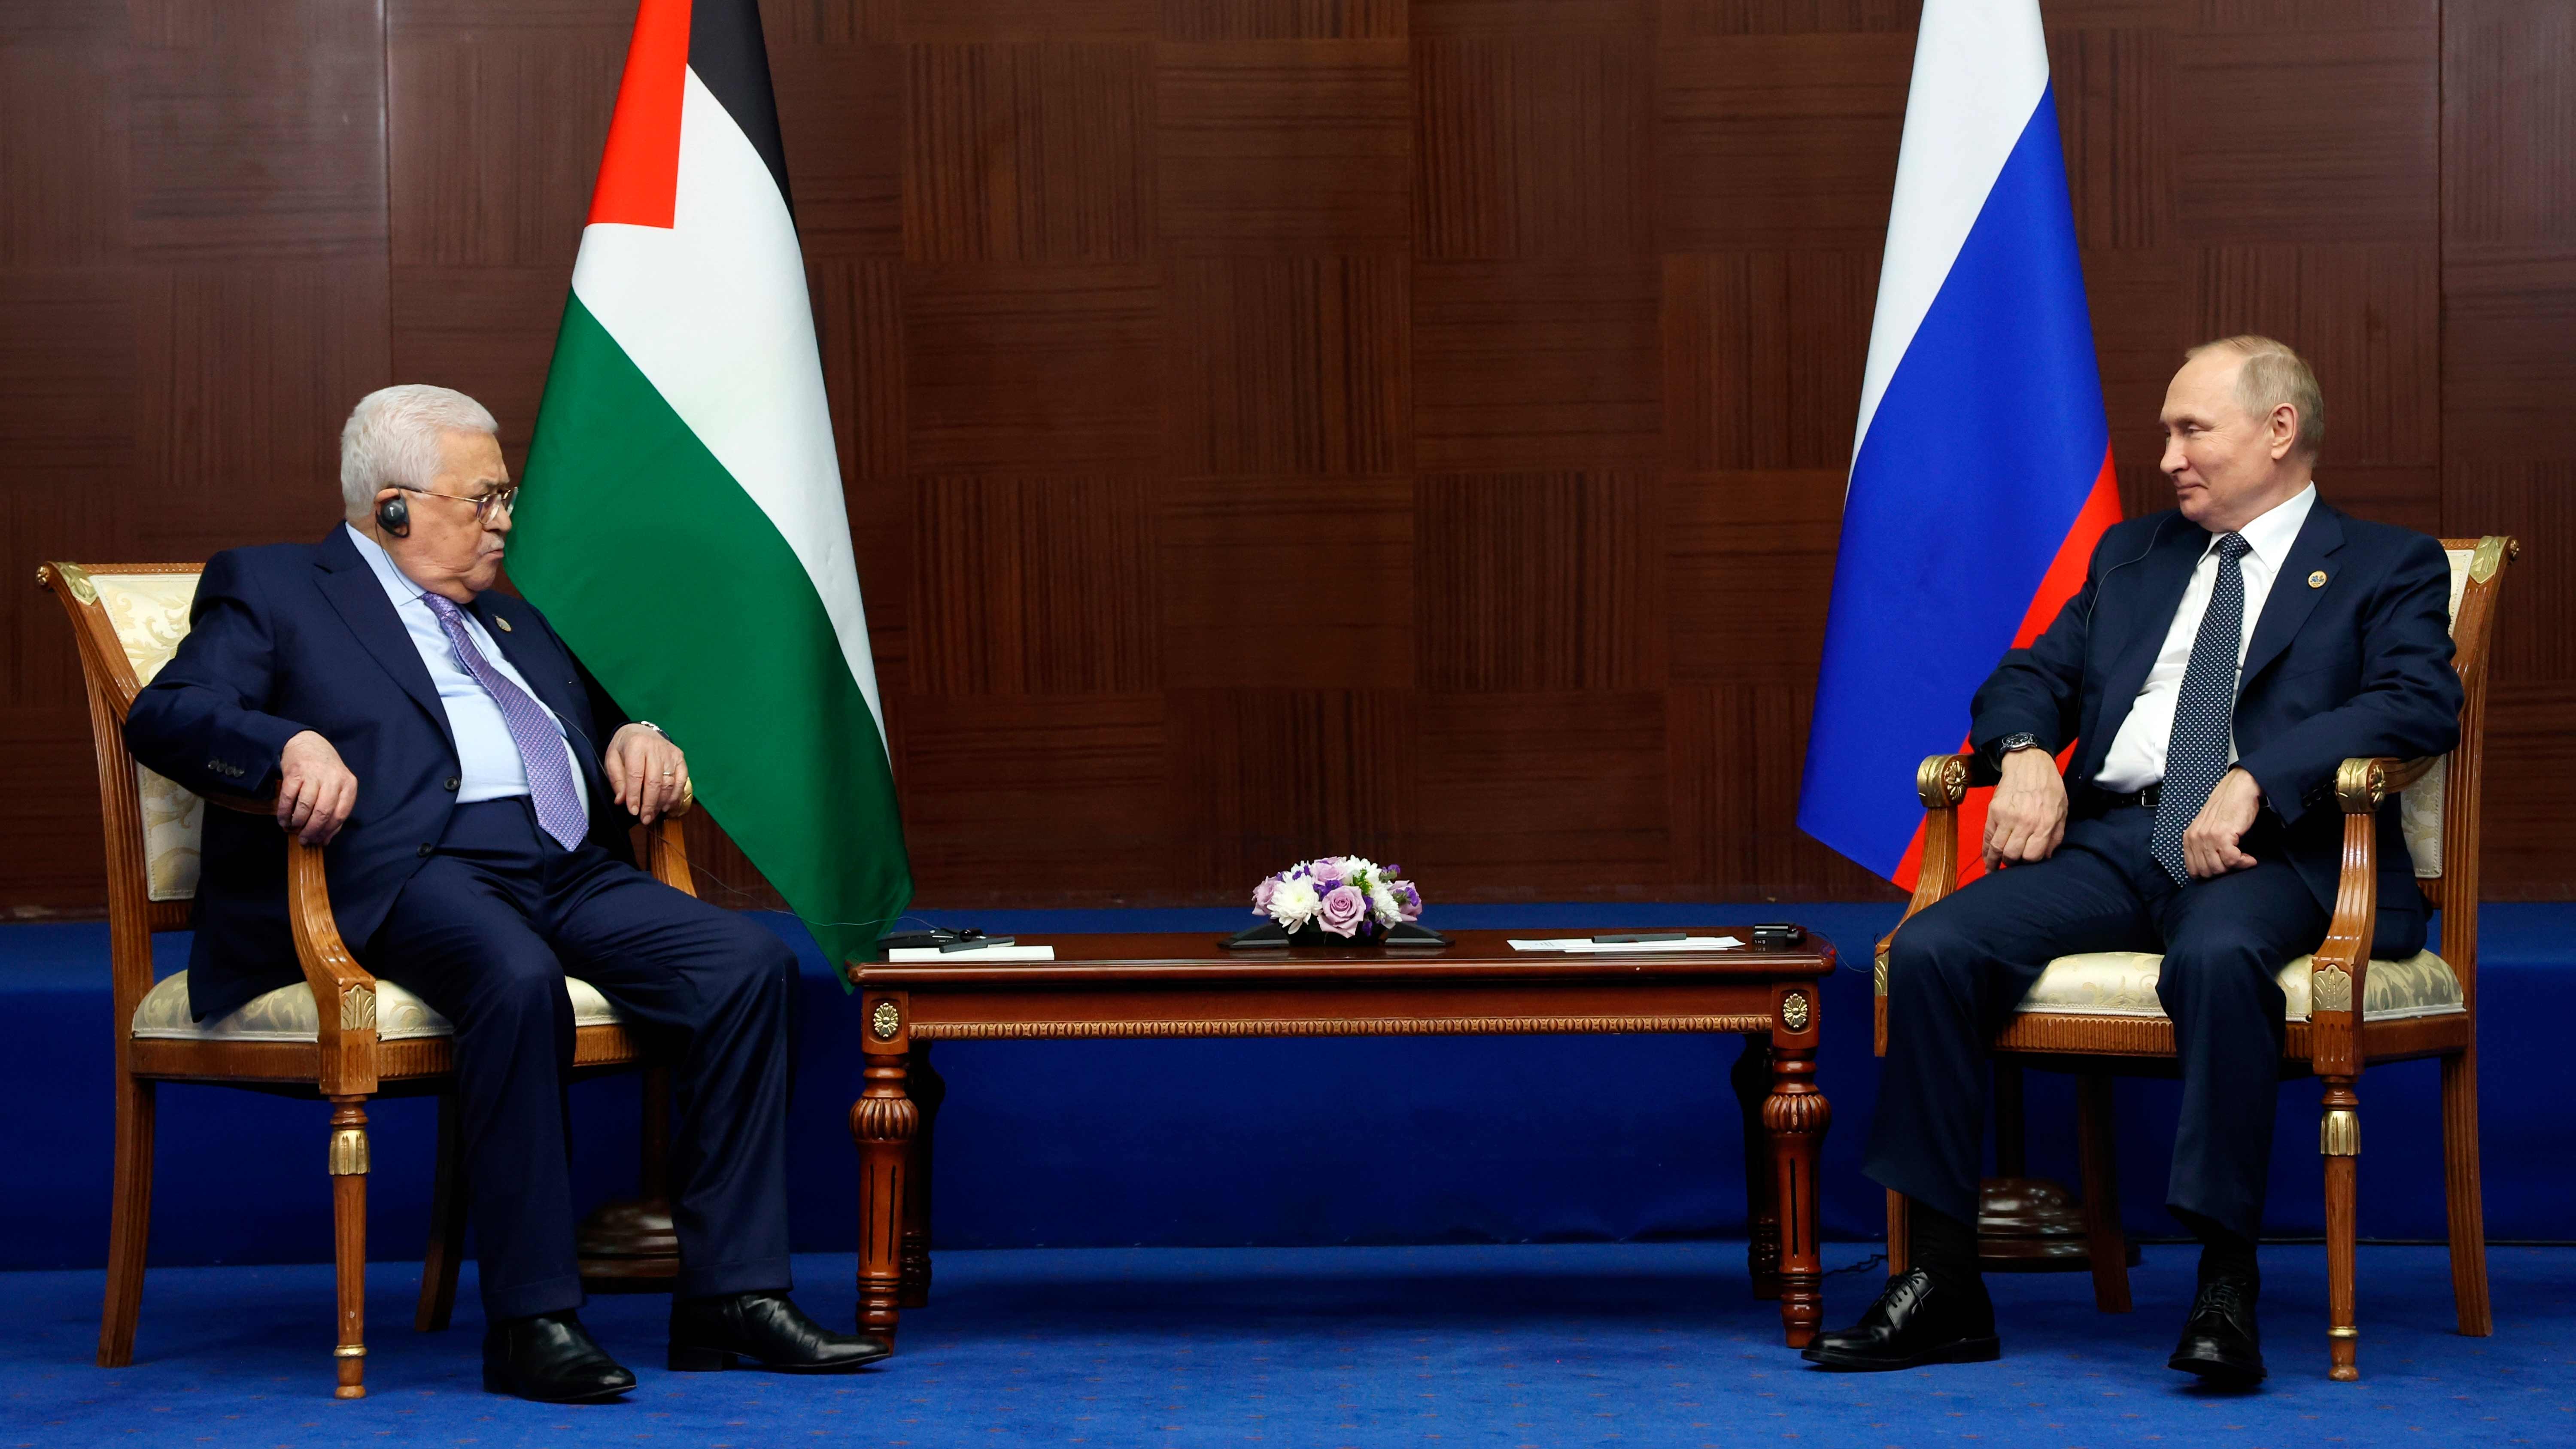 Palestinian President In Front Of Putin Rules Out Us As Mideast Peace